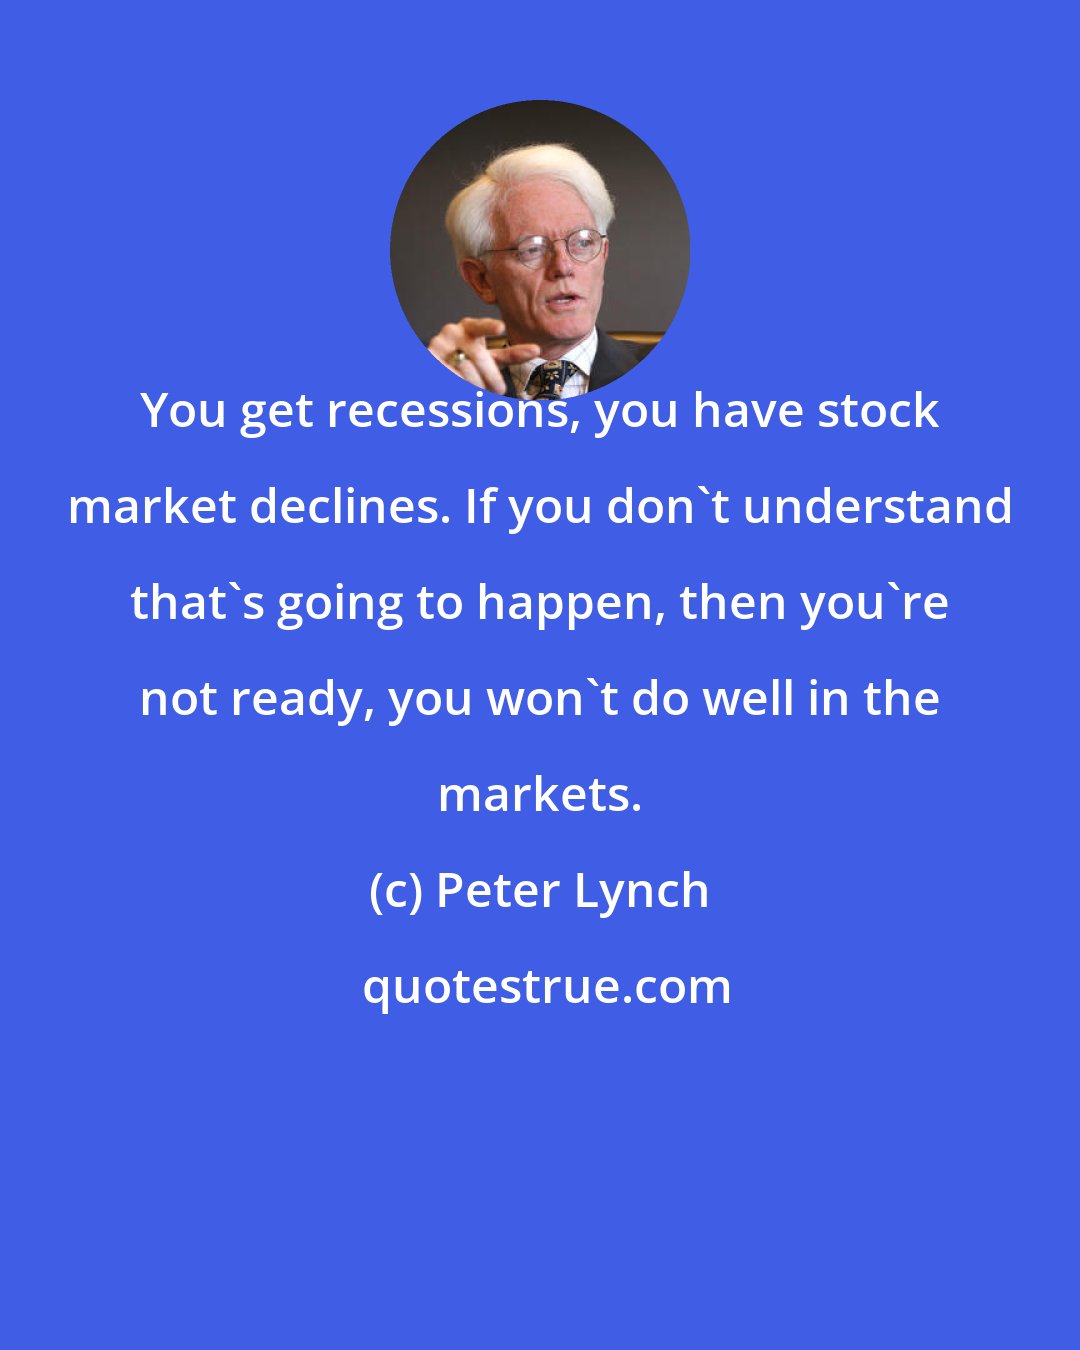 Peter Lynch: You get recessions, you have stock market declines. If you don't understand that's going to happen, then you're not ready, you won't do well in the markets.